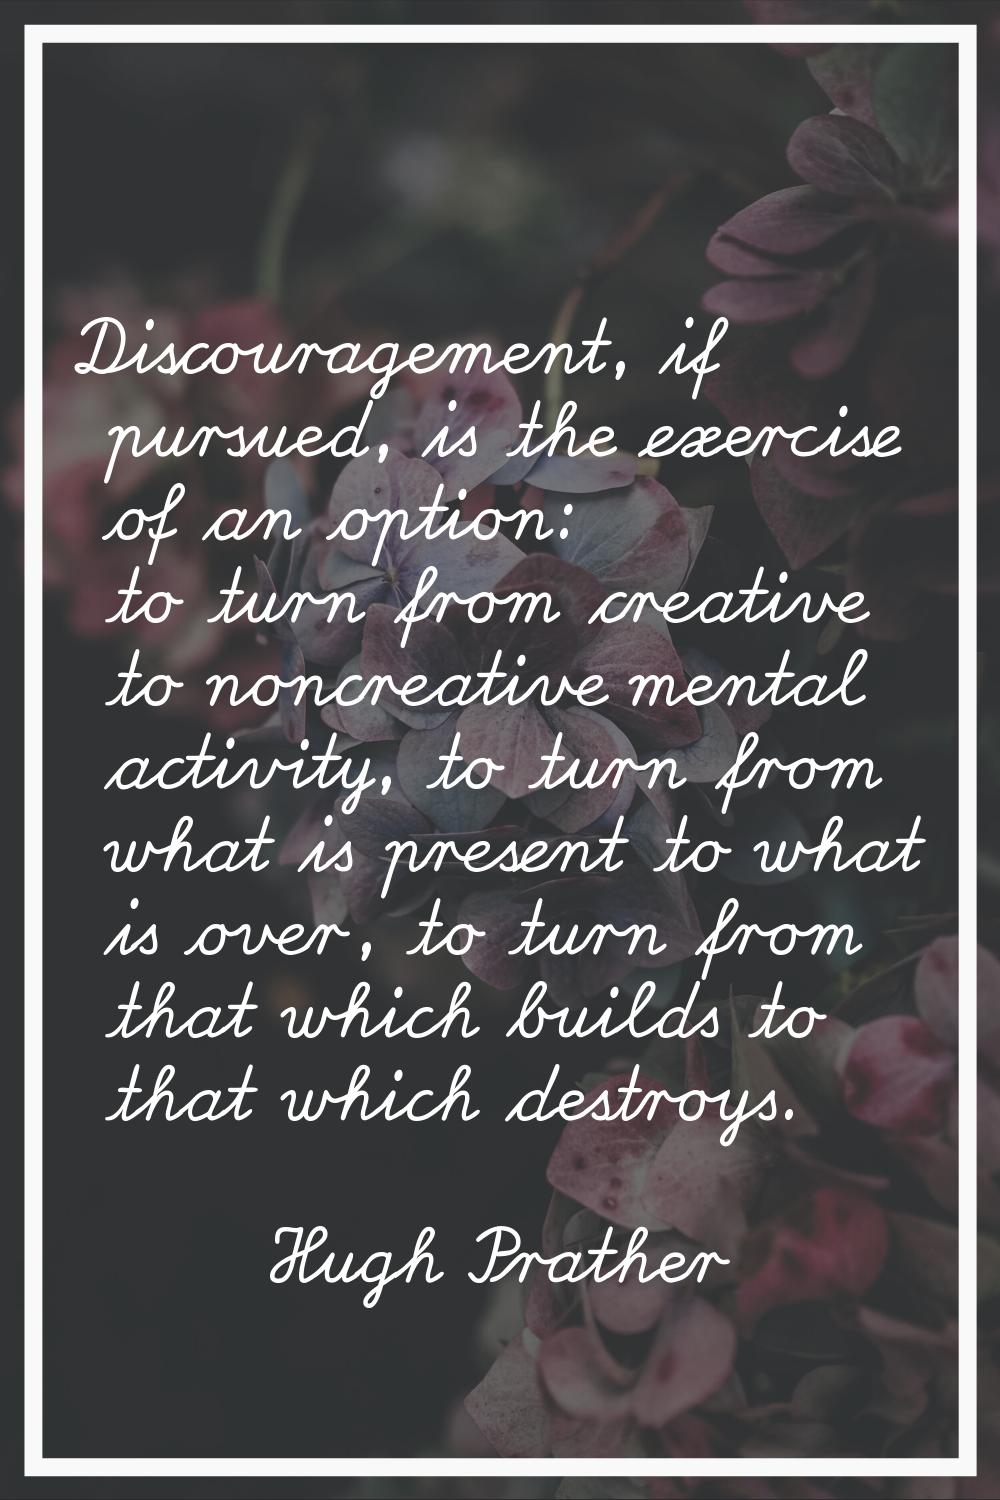 Discouragement, if pursued, is the exercise of an option: to turn from creative to noncreative ment